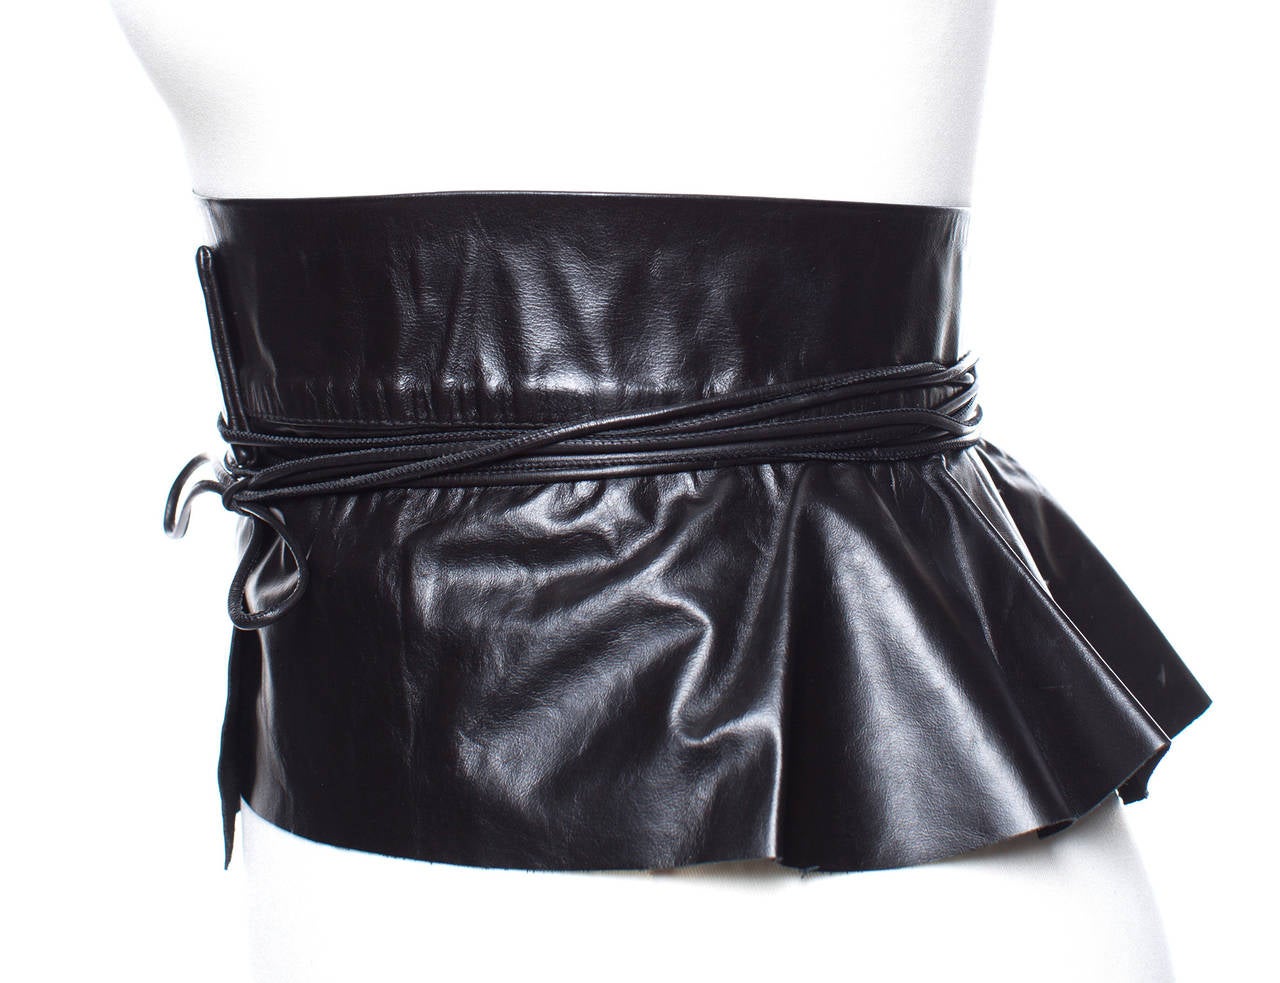 Martin Margiela Vintage Leather Peplum Belt from early 2000's, Sz. L at ...